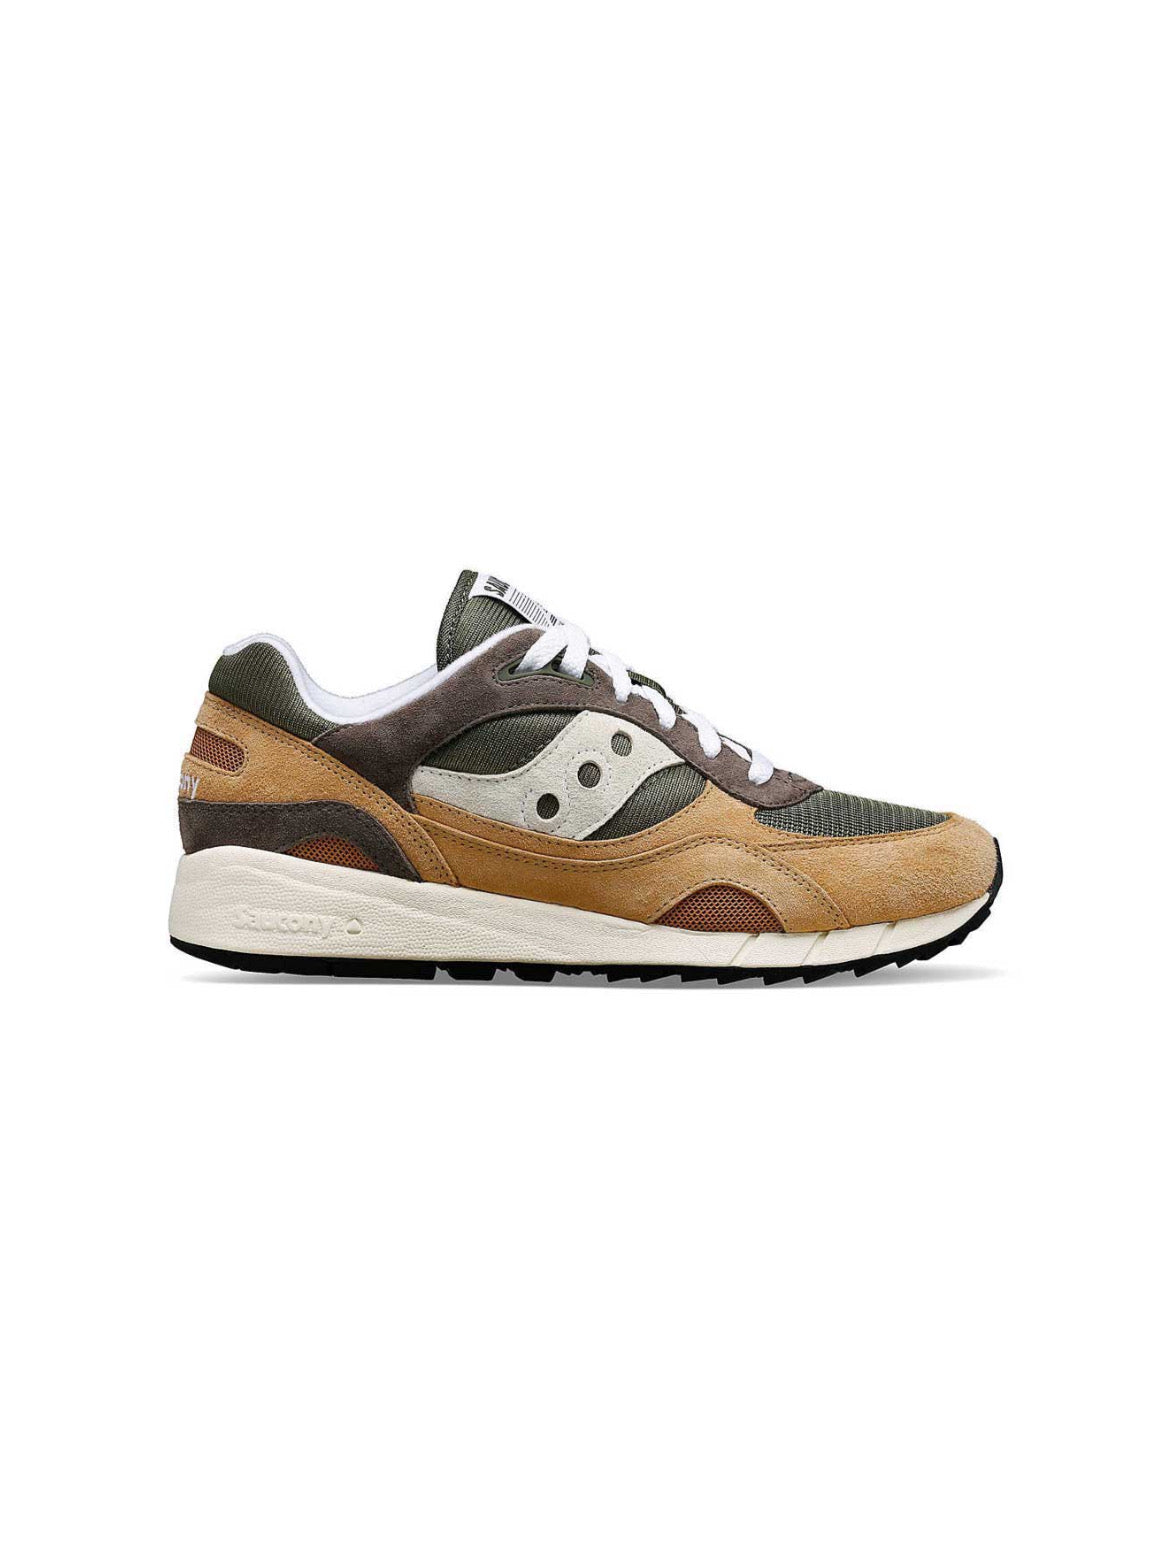 Saucony Shadow 6000 green/brown